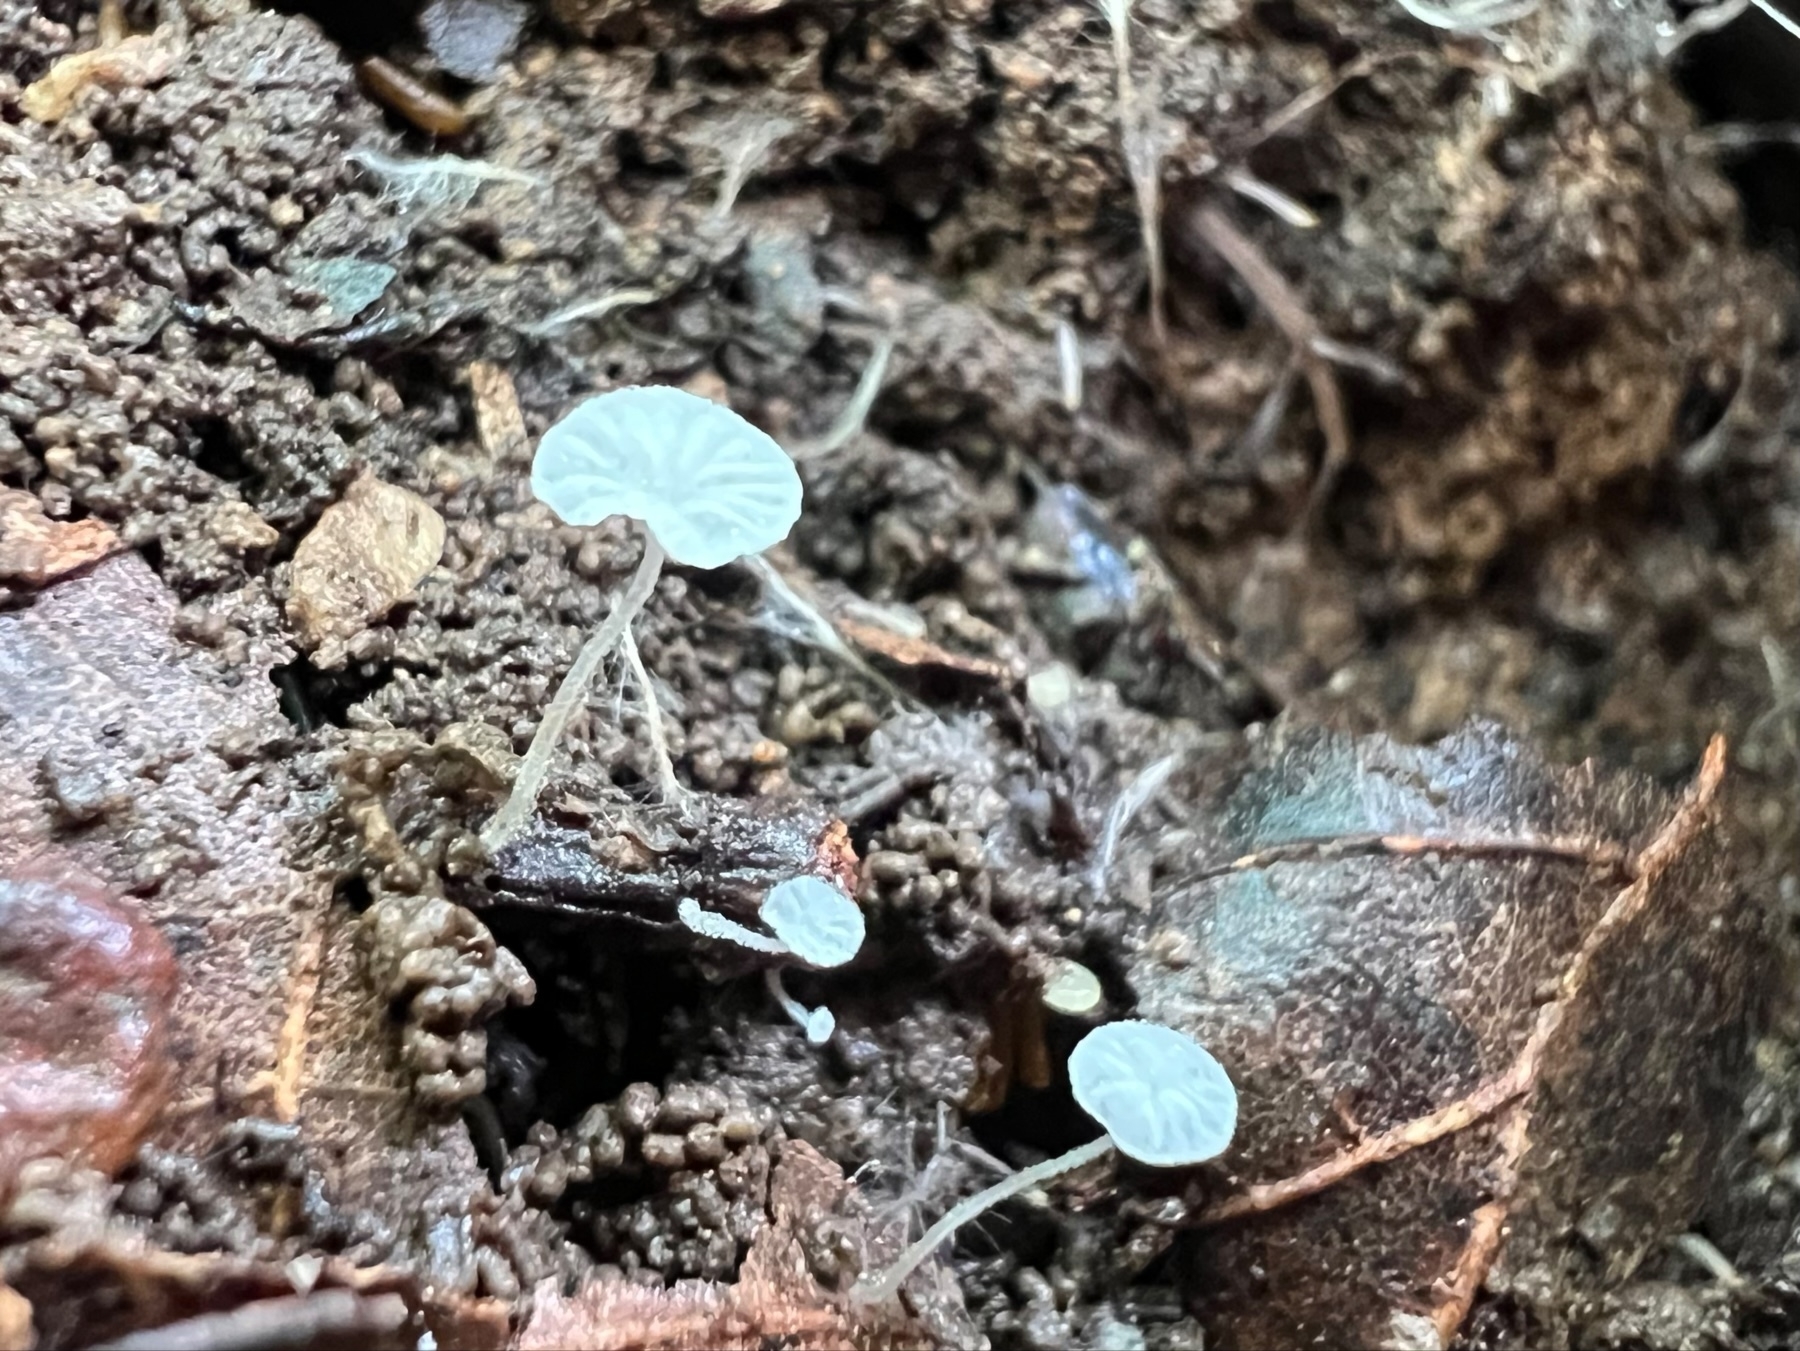 Very tiny white mushrooms growing in soil and organic matter